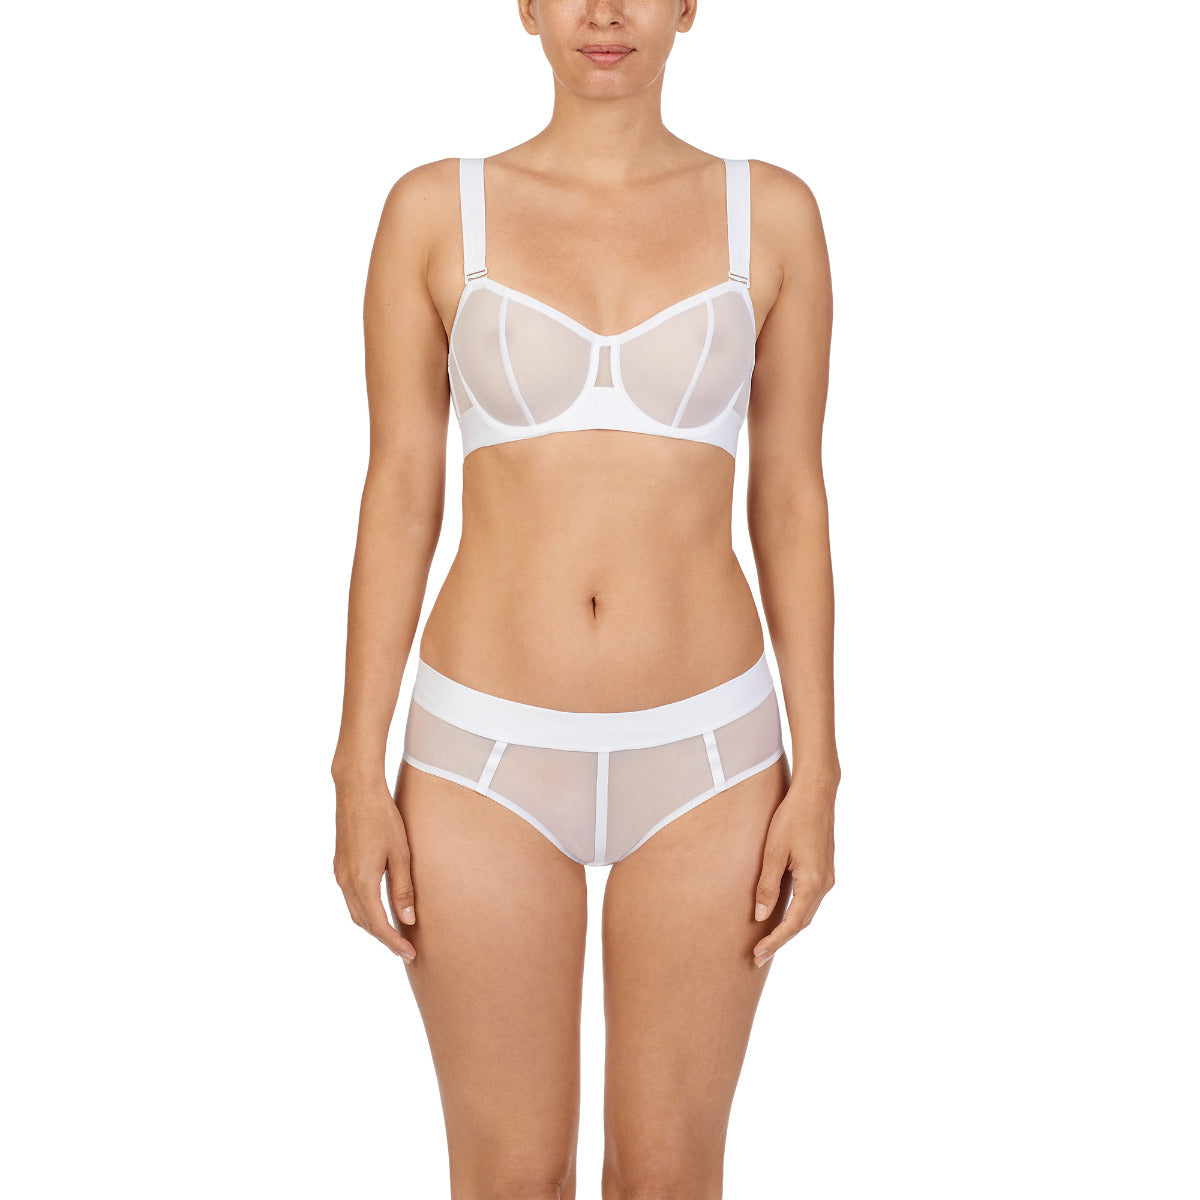 DKNY Intimates SHEERS CONVERTIBLE STRAPLESS - Underwired bra